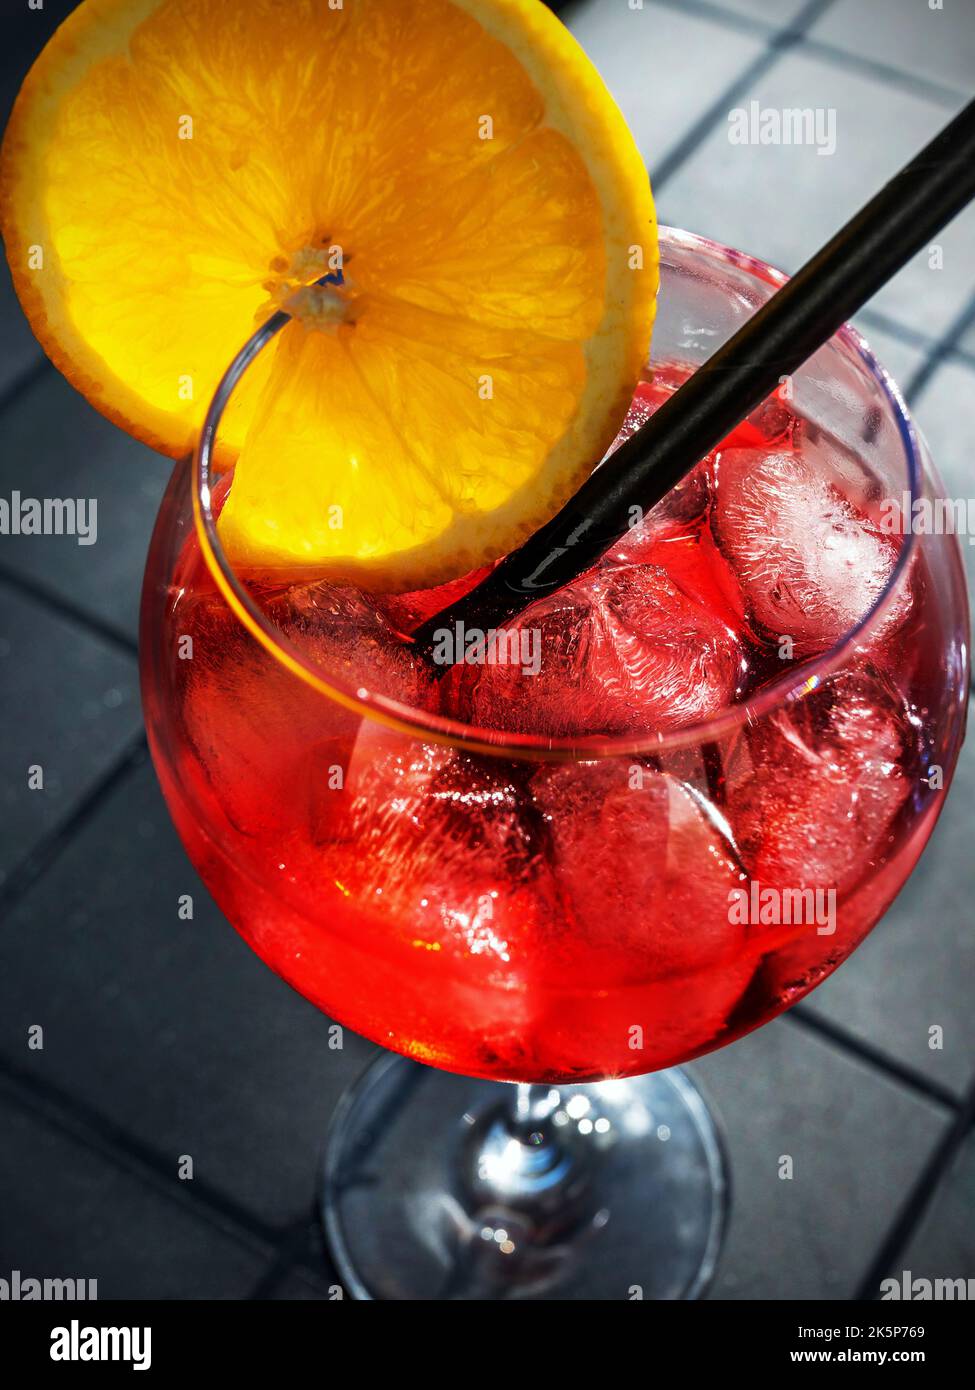 Summer cocktail, red italian alcoholic beverage, drink with ice, sliced orange and straw, closeup. Stock Photo